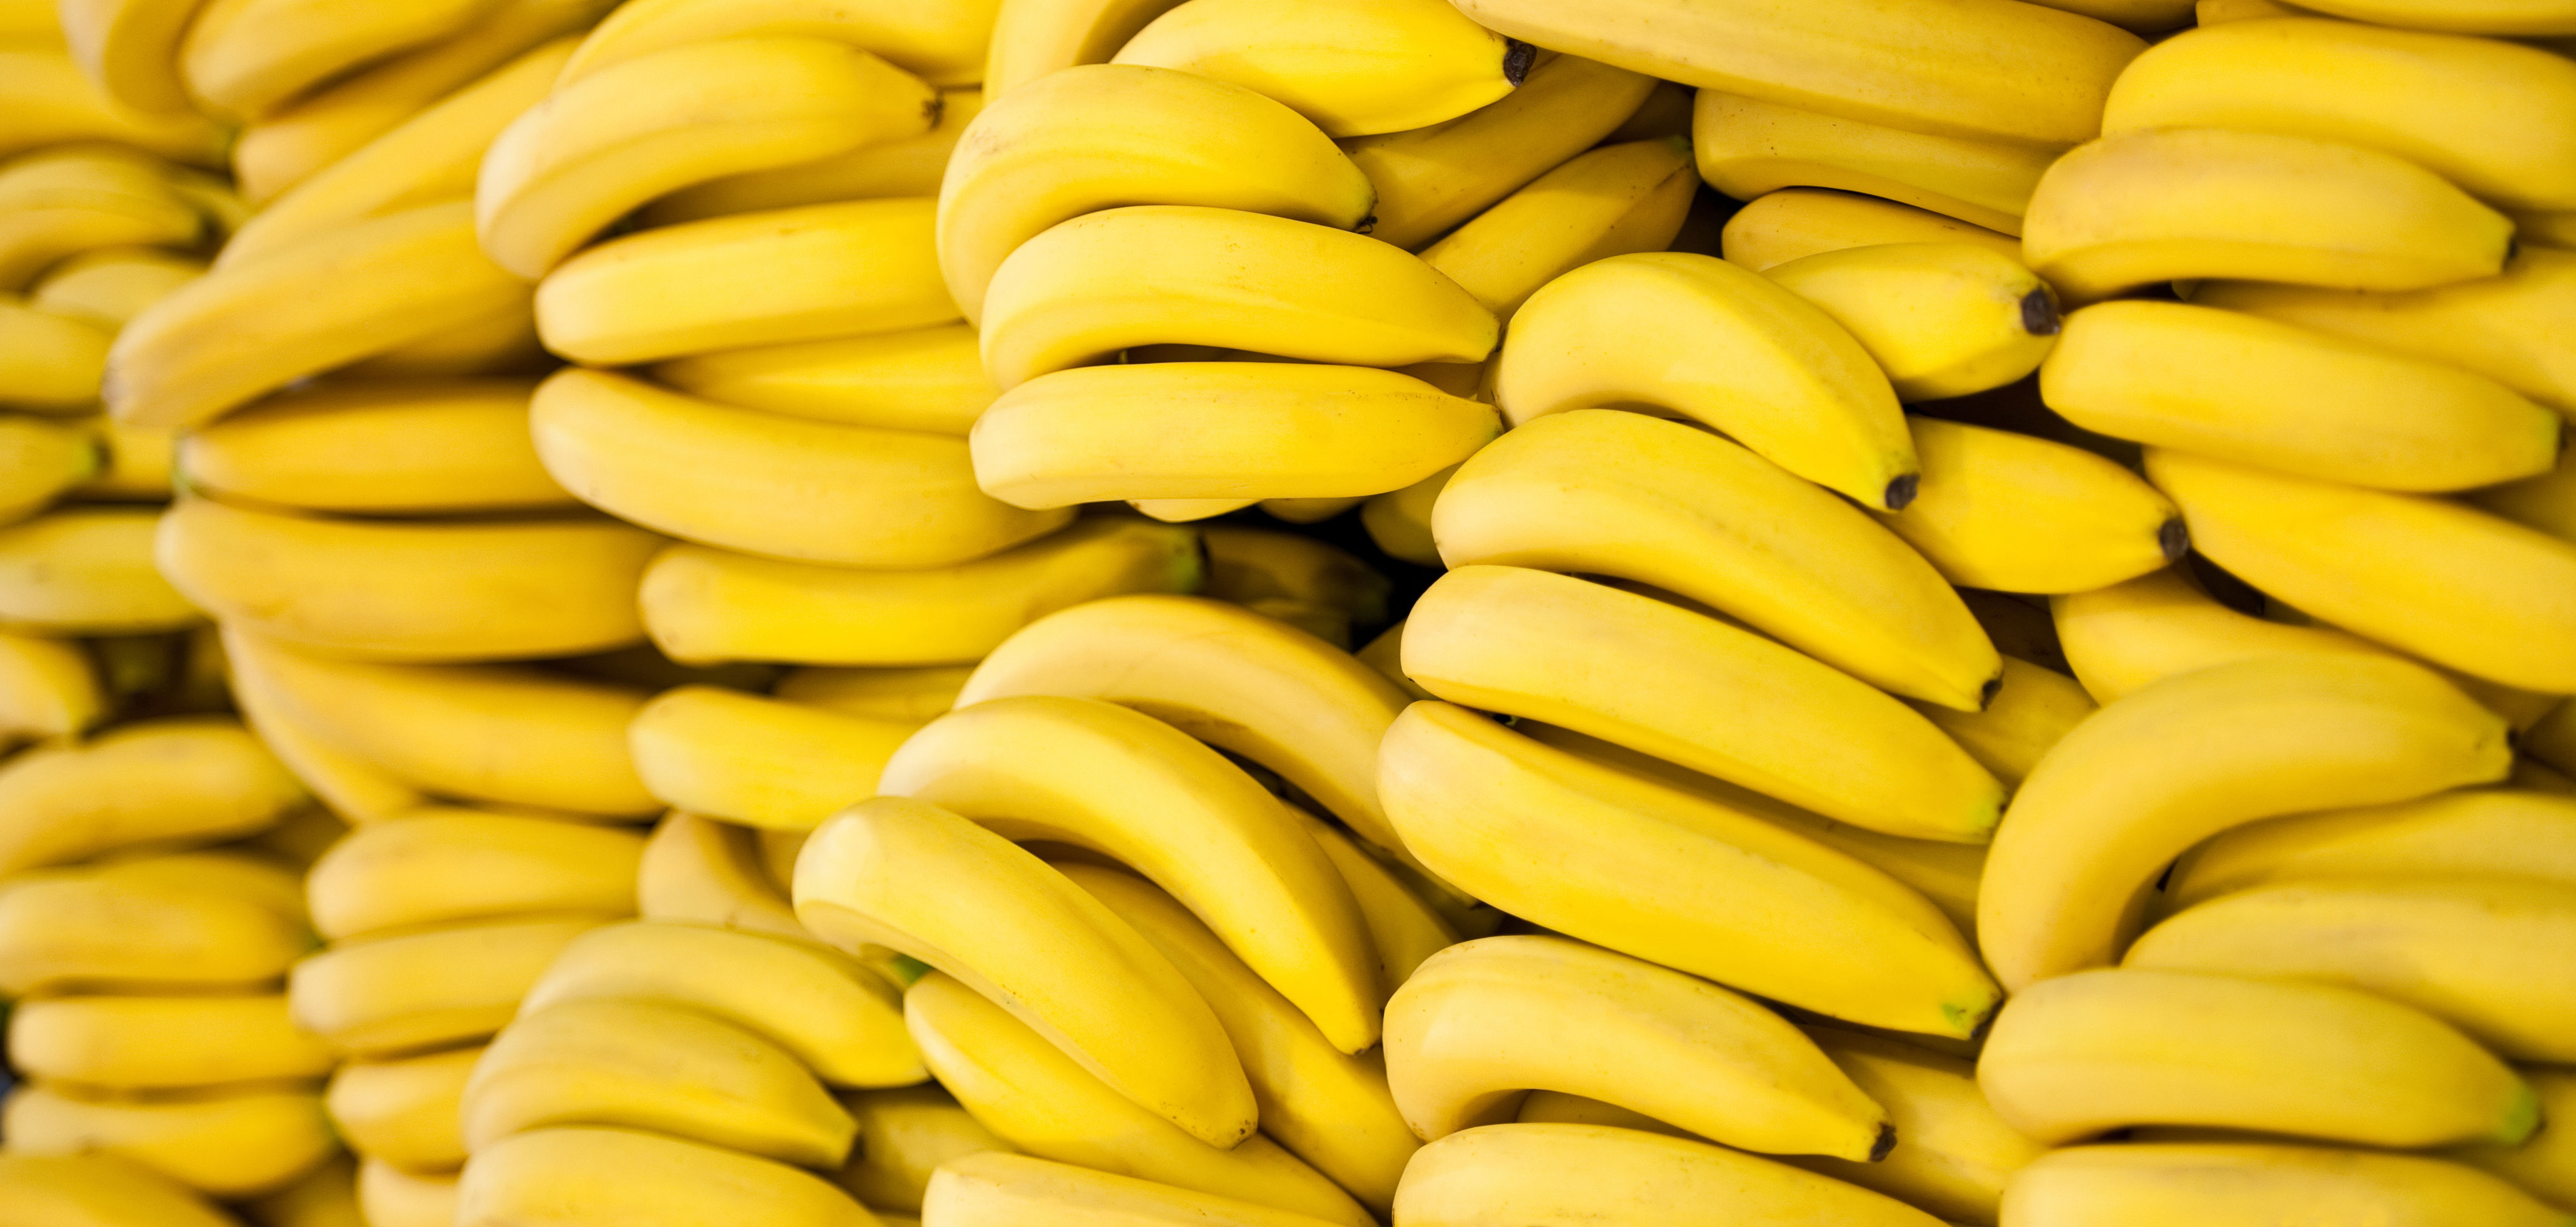 Are Bananas Healthy for You? - [Updated June 2018]